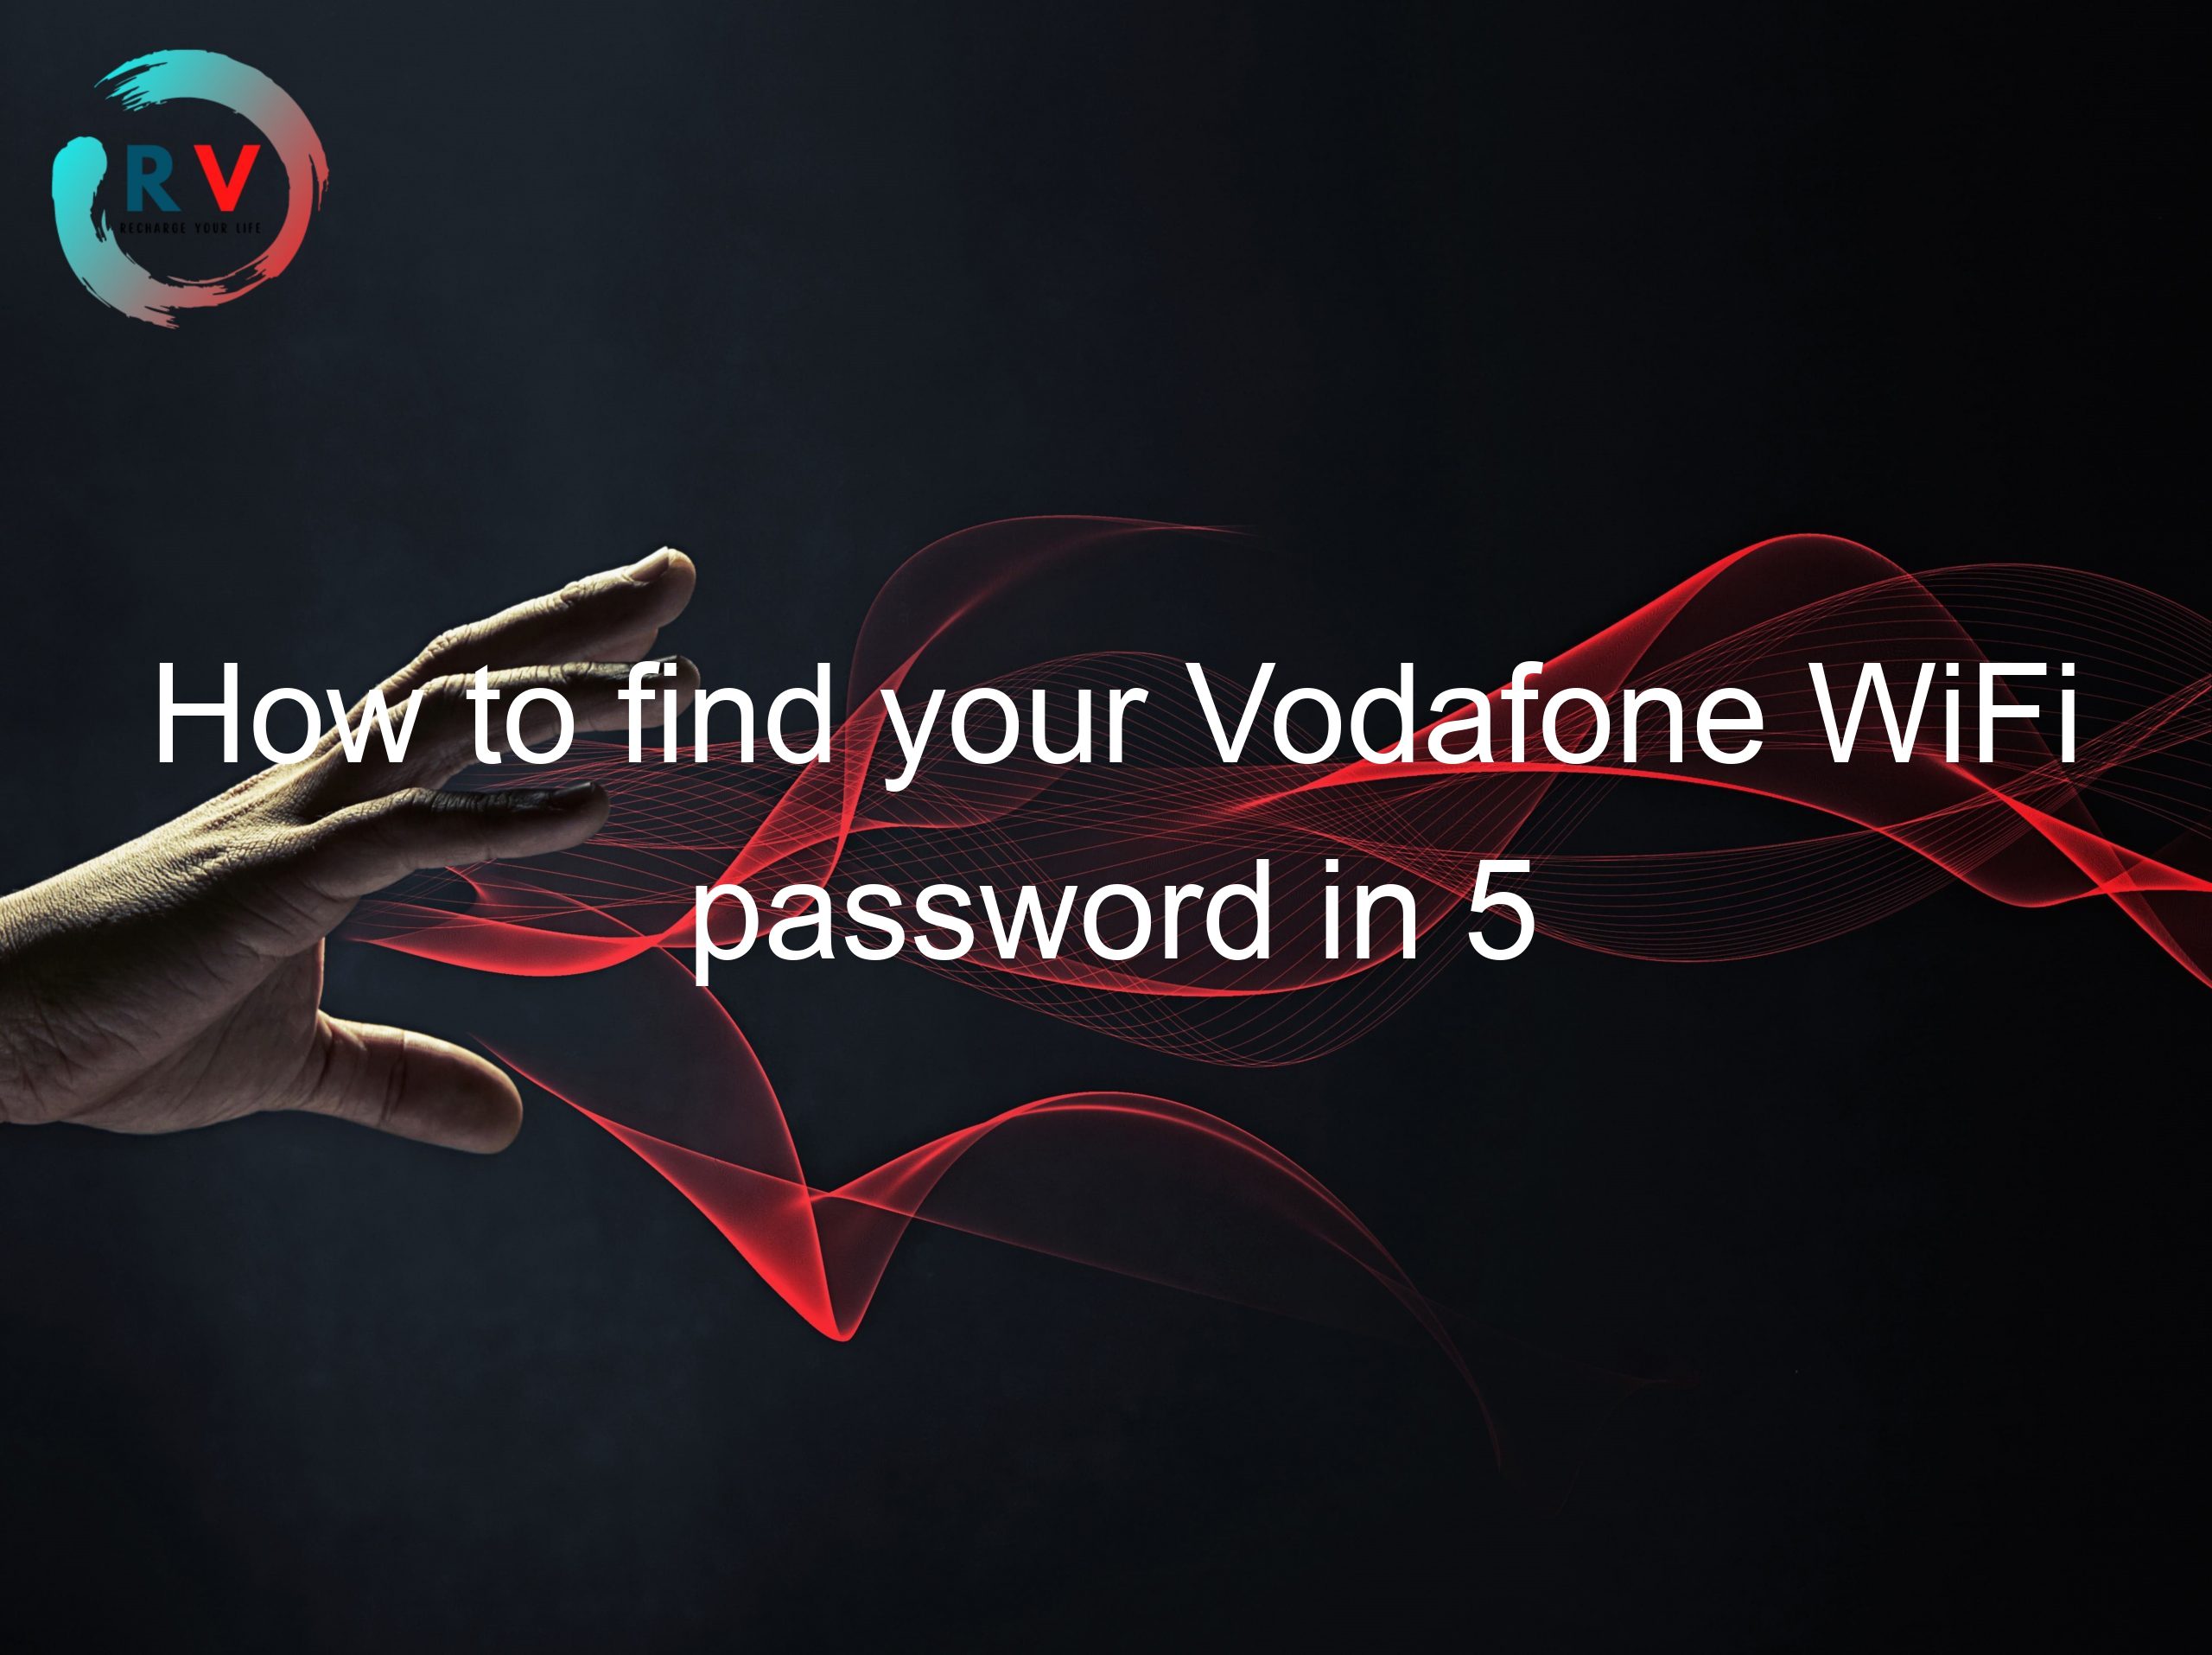 How to find your Vodafone WiFi password in 5 minutes or less!